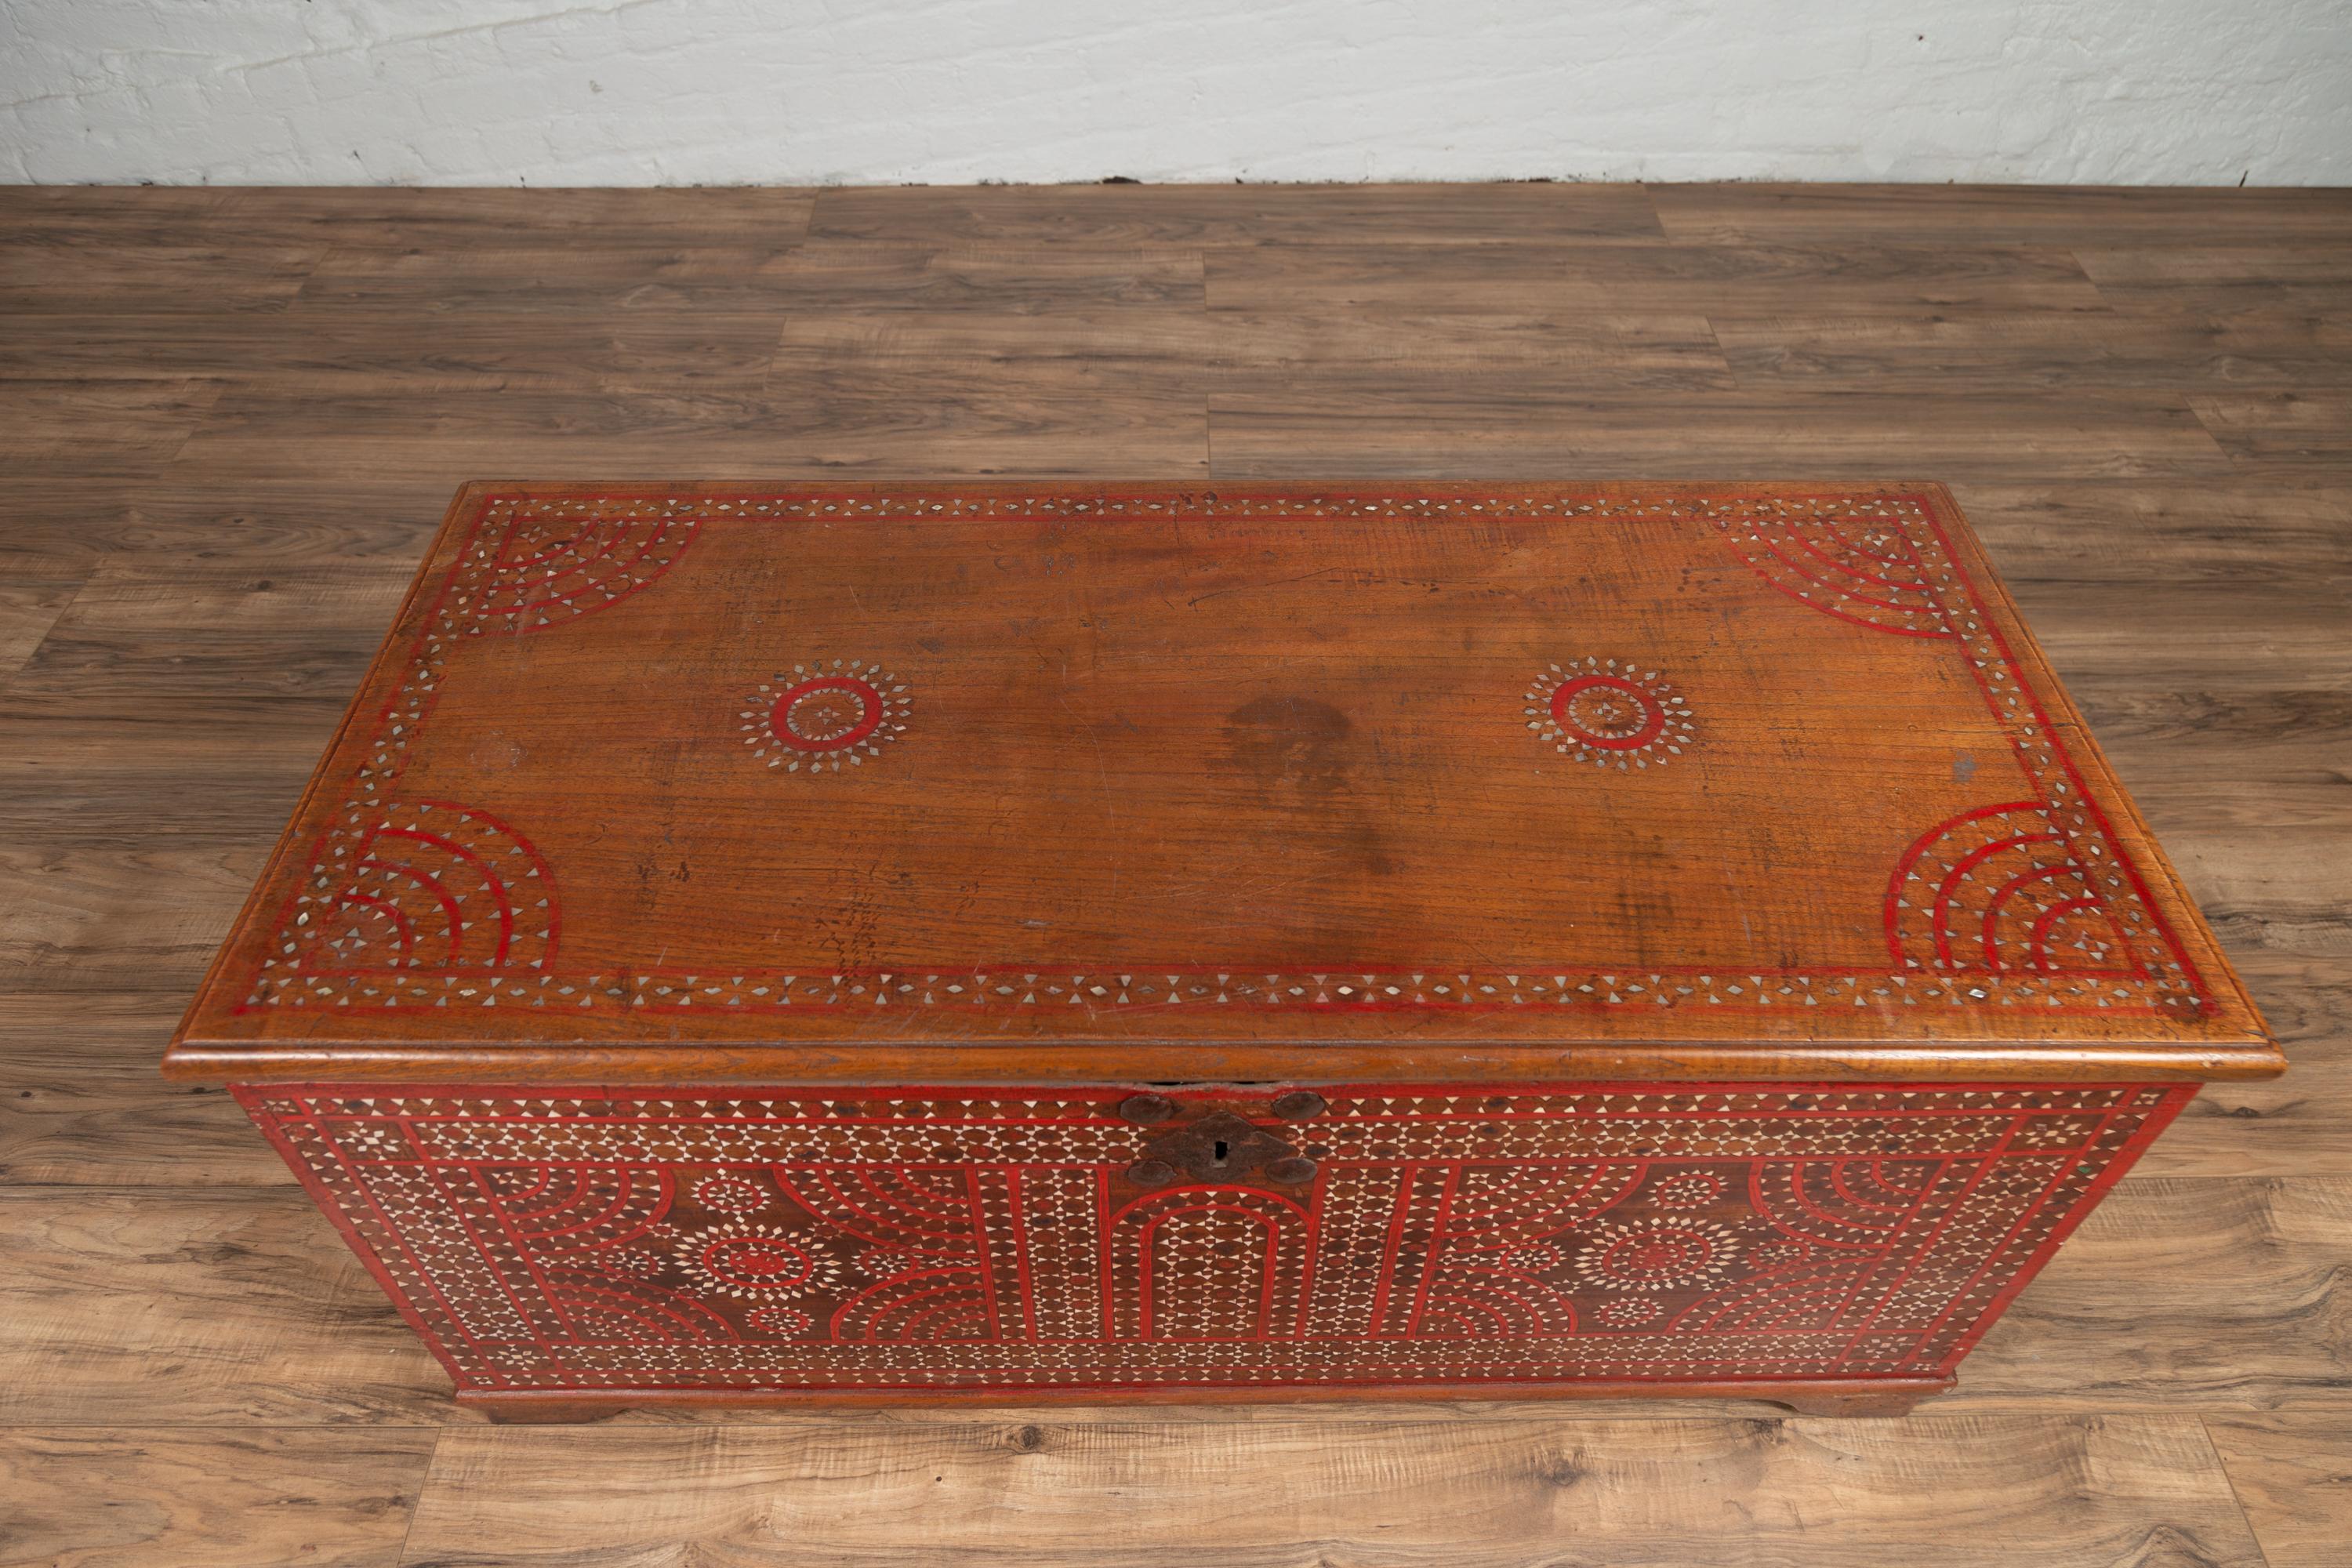 Indonesian Antique Madura Blanket Chest with Red Geometric Decor and Inlaid Mother-of-pearl